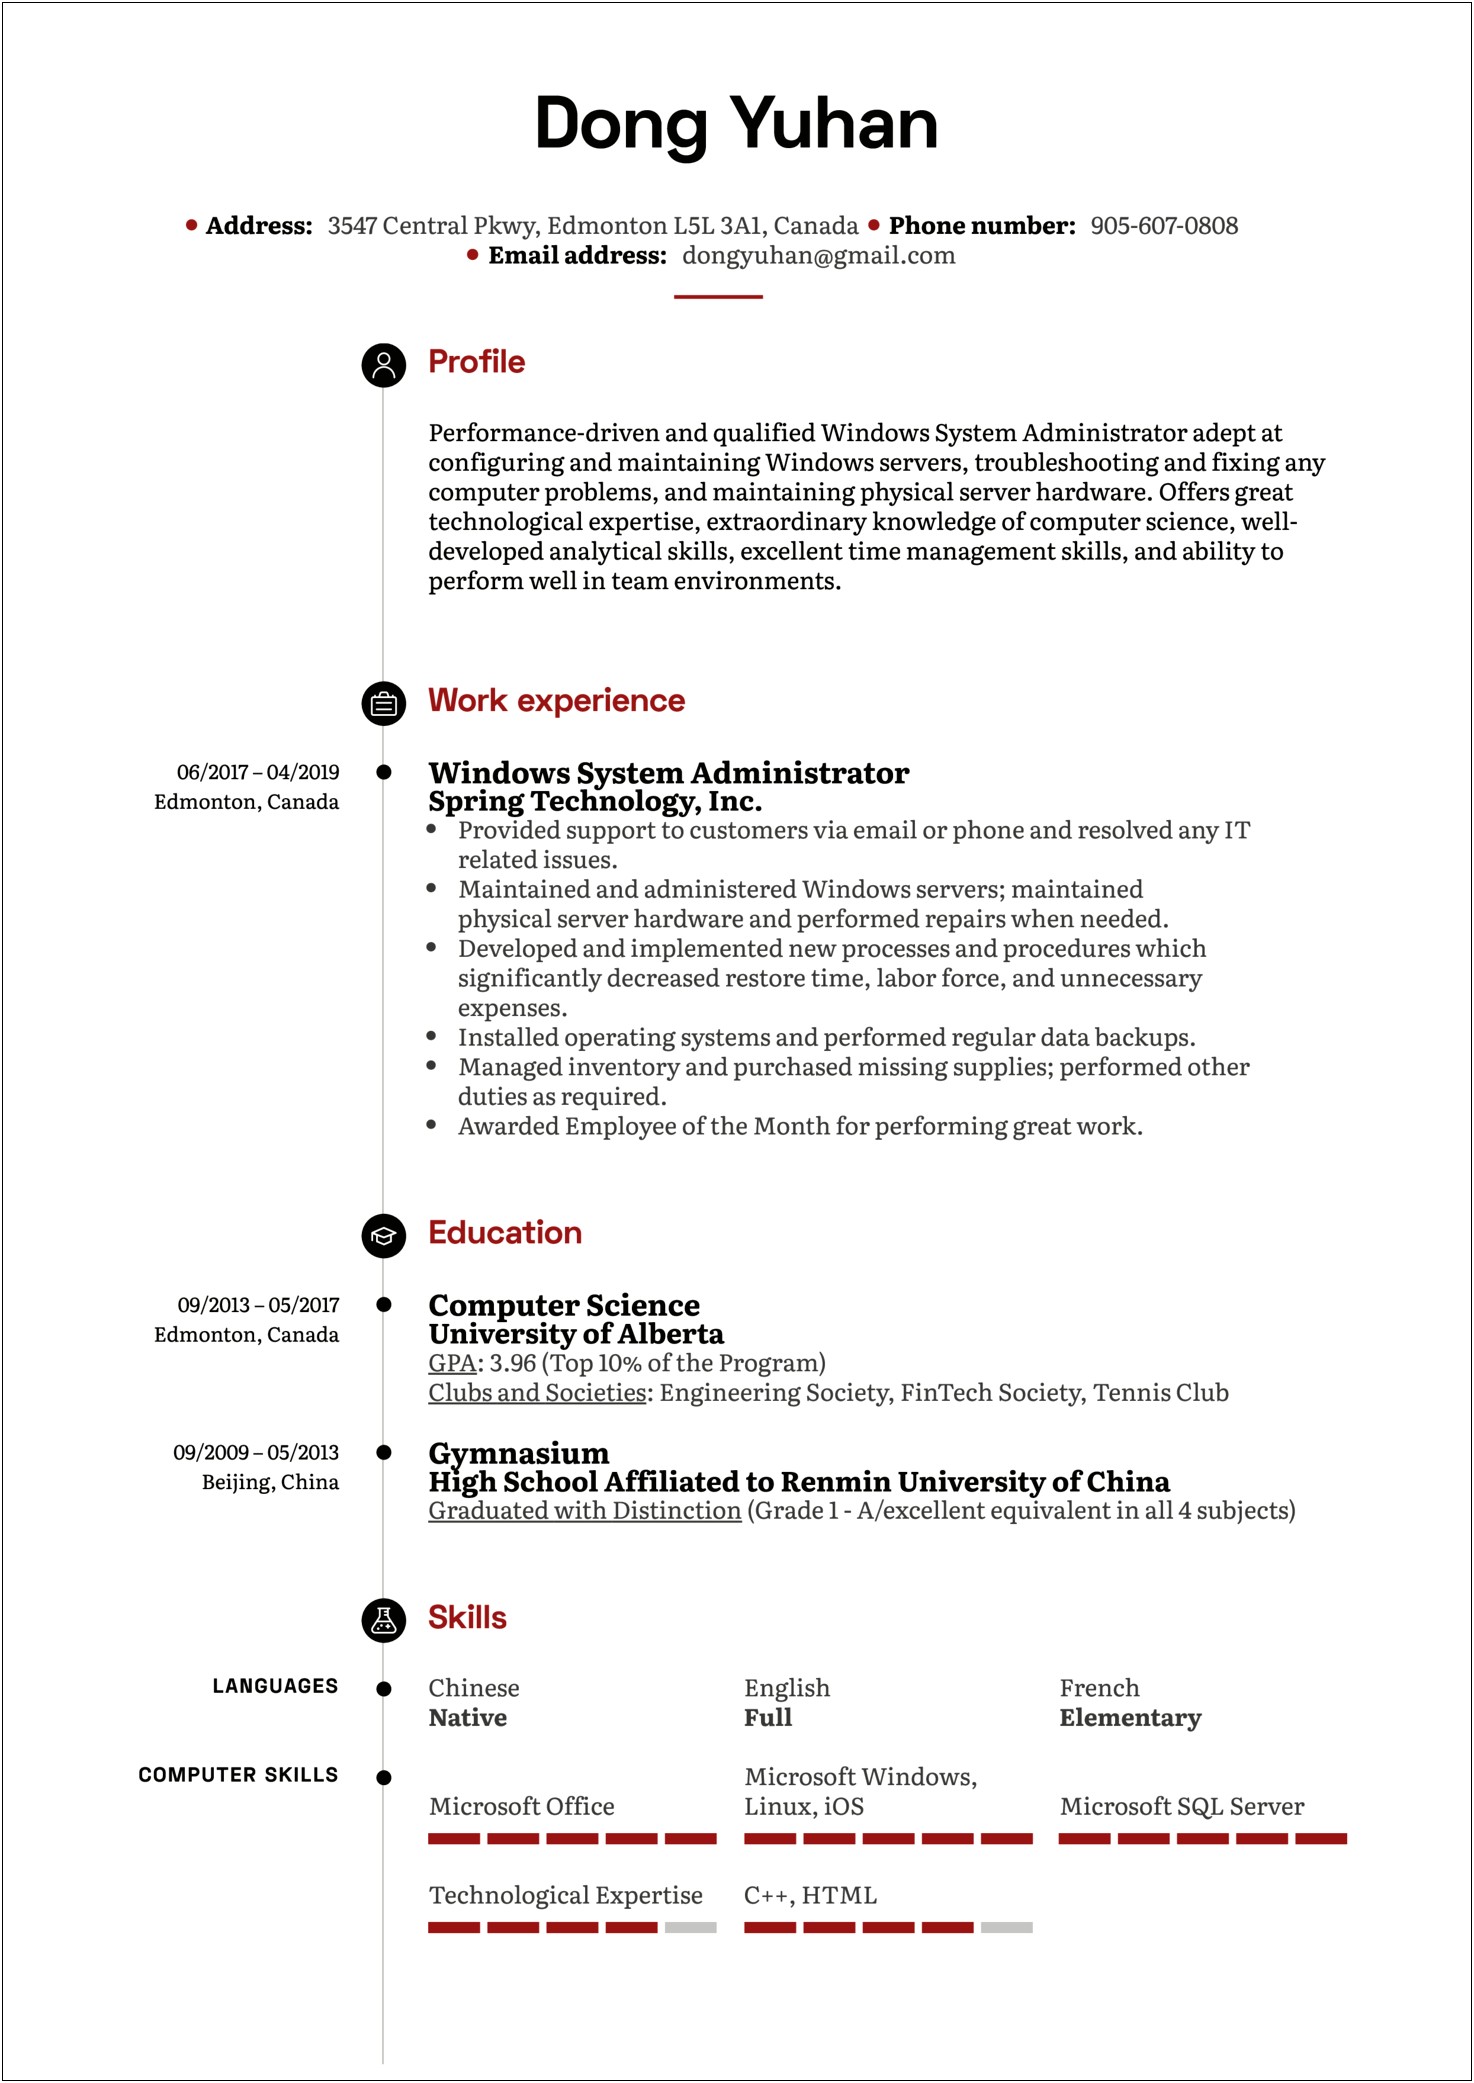 Experience Resume For Windows Server Administrator